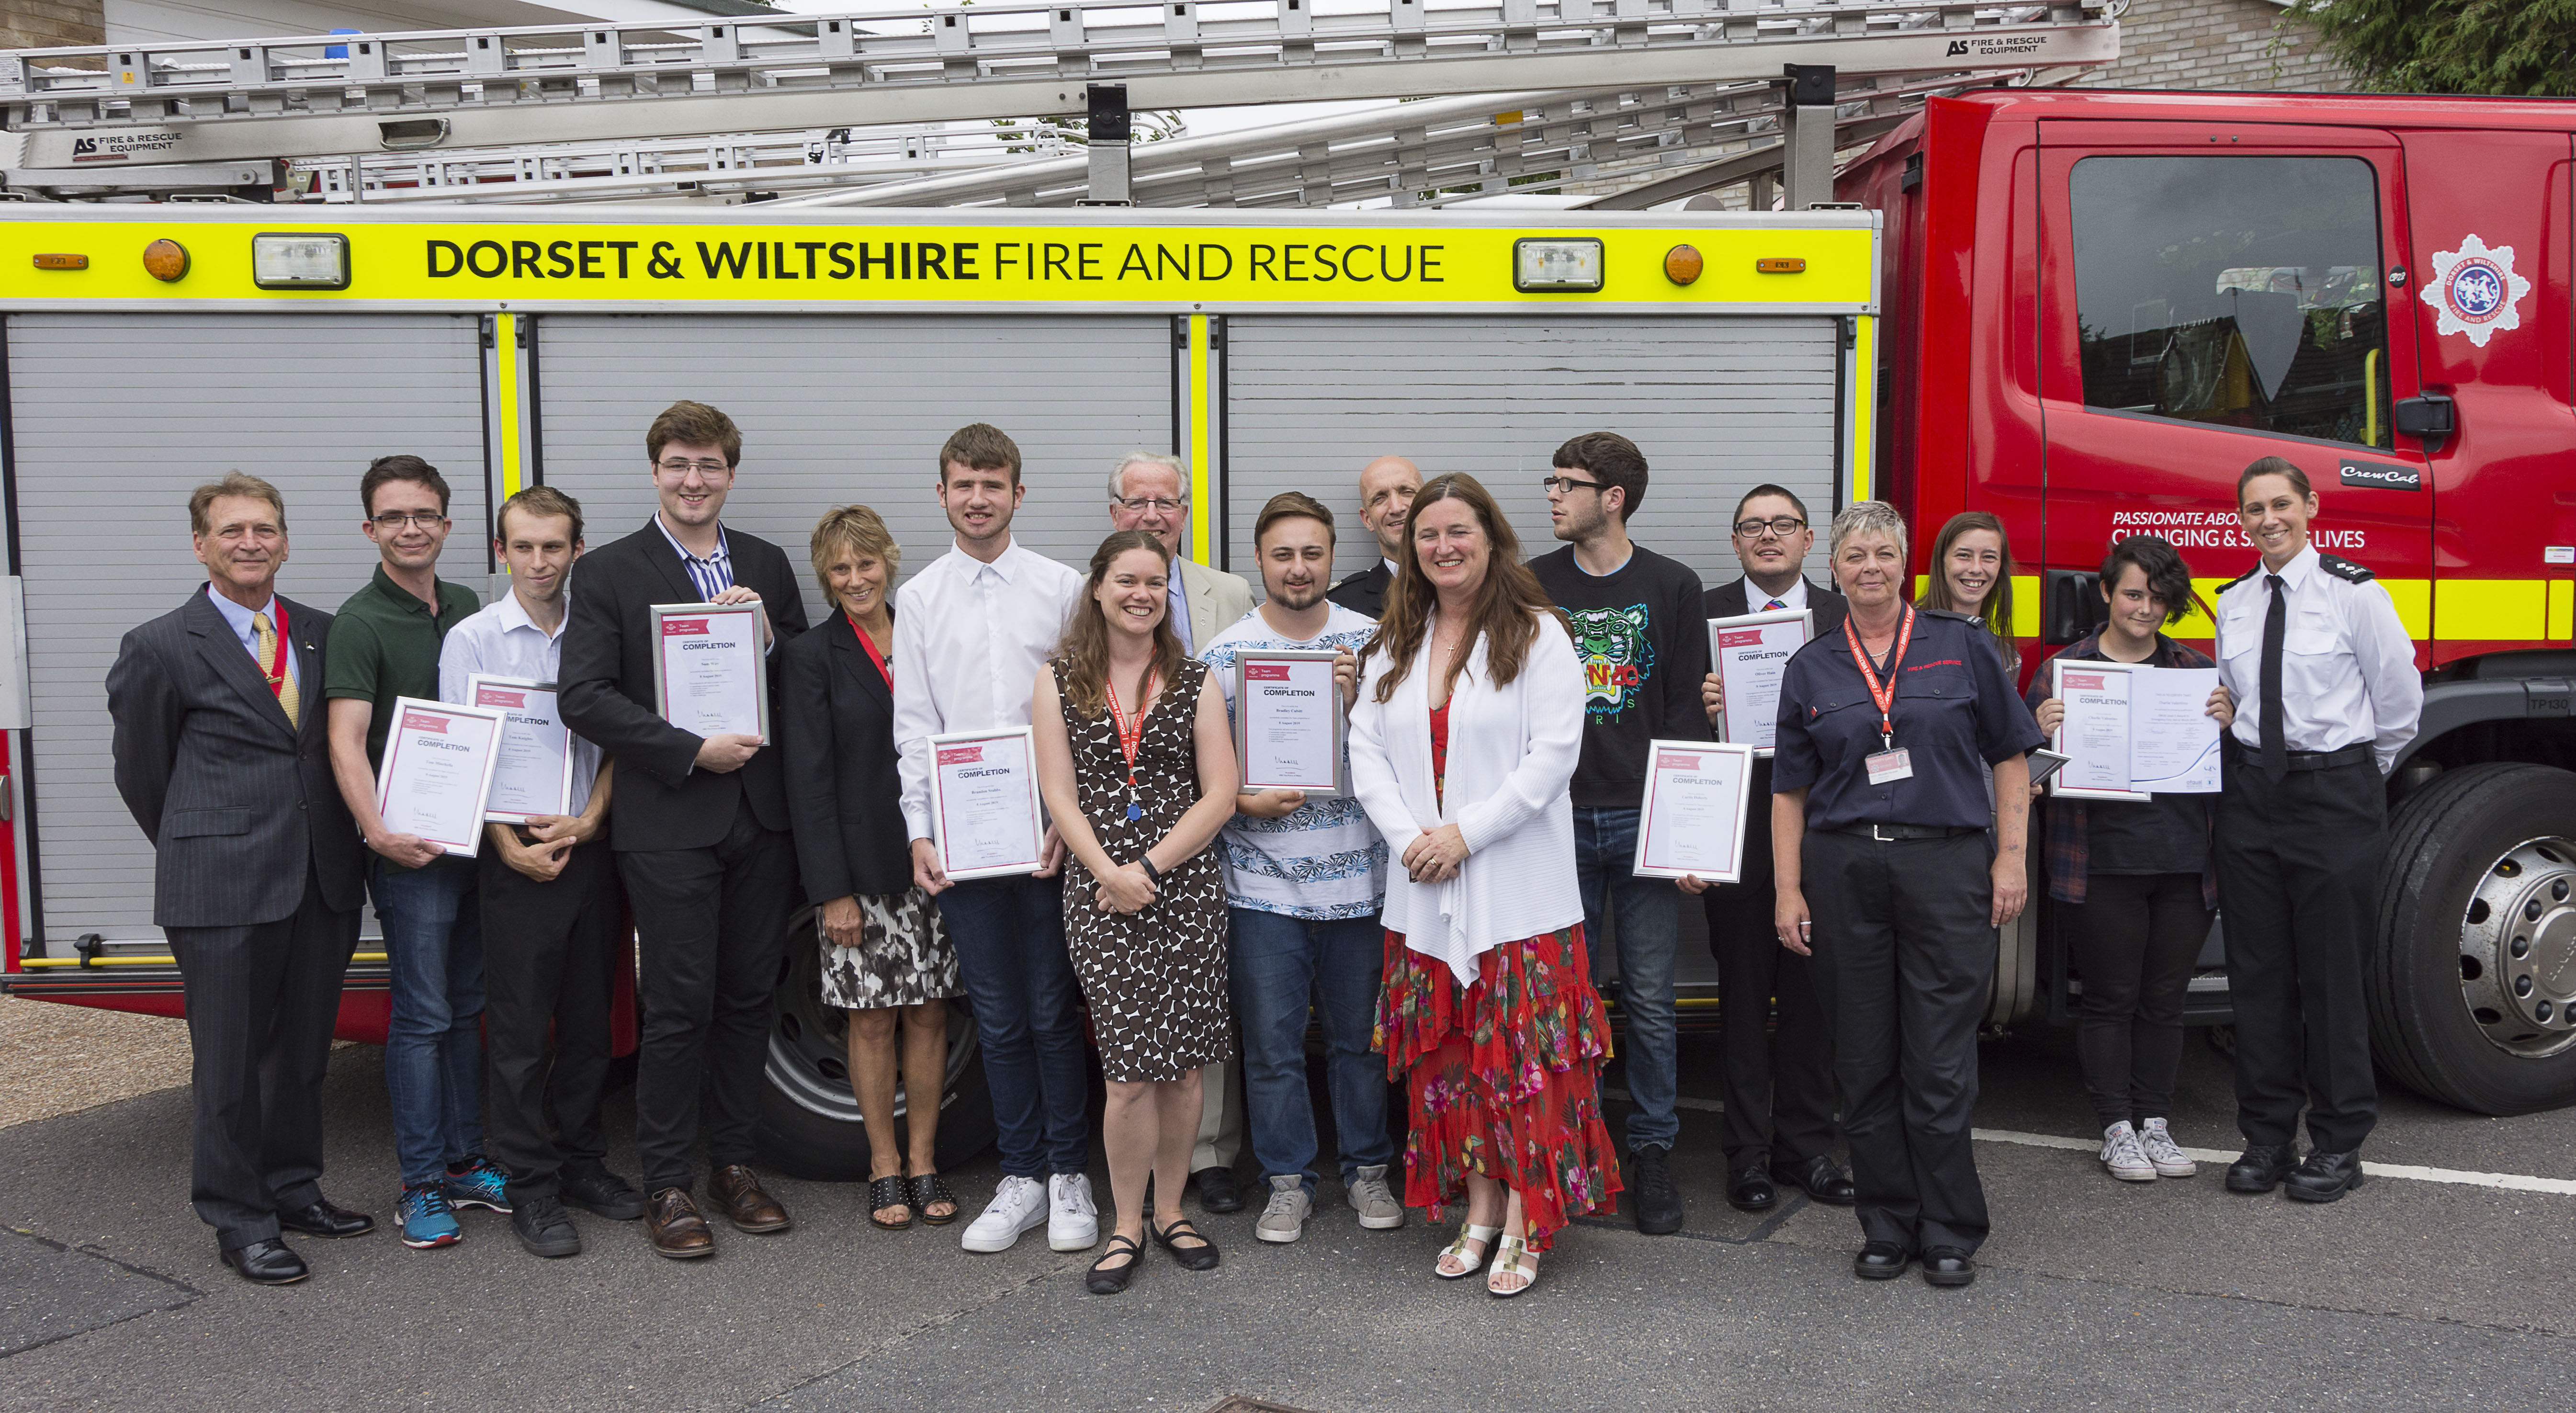 The Prince's Trust team with their certificates and guests